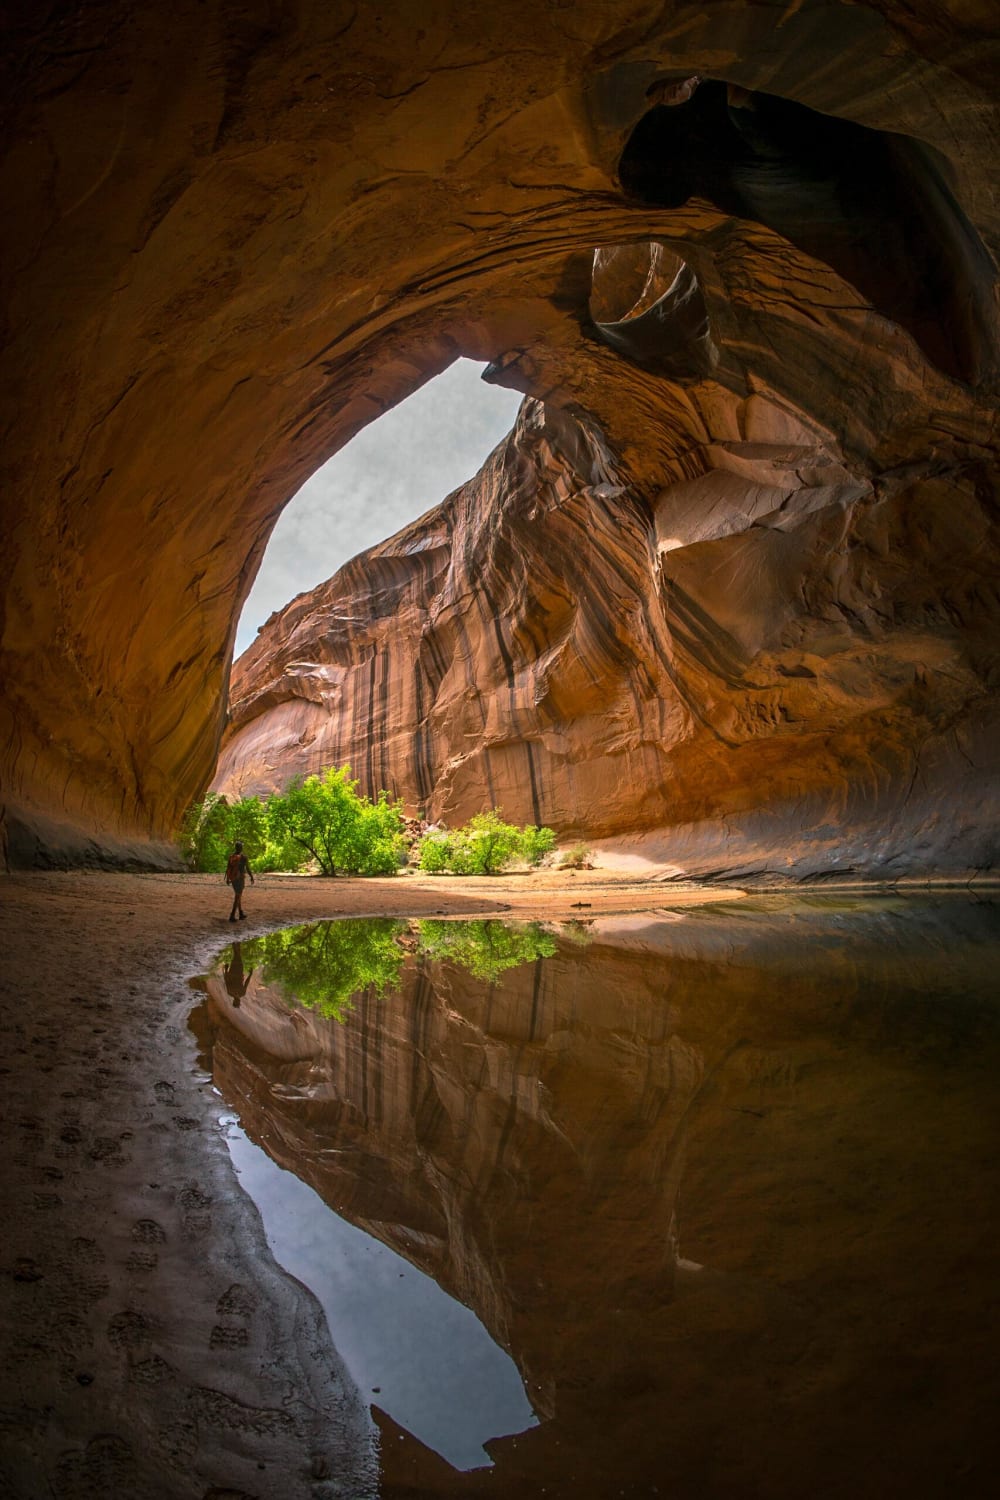 Complete solitude within the Golden Cathedral, Grand Staircase - Escalante, Utah, USA.